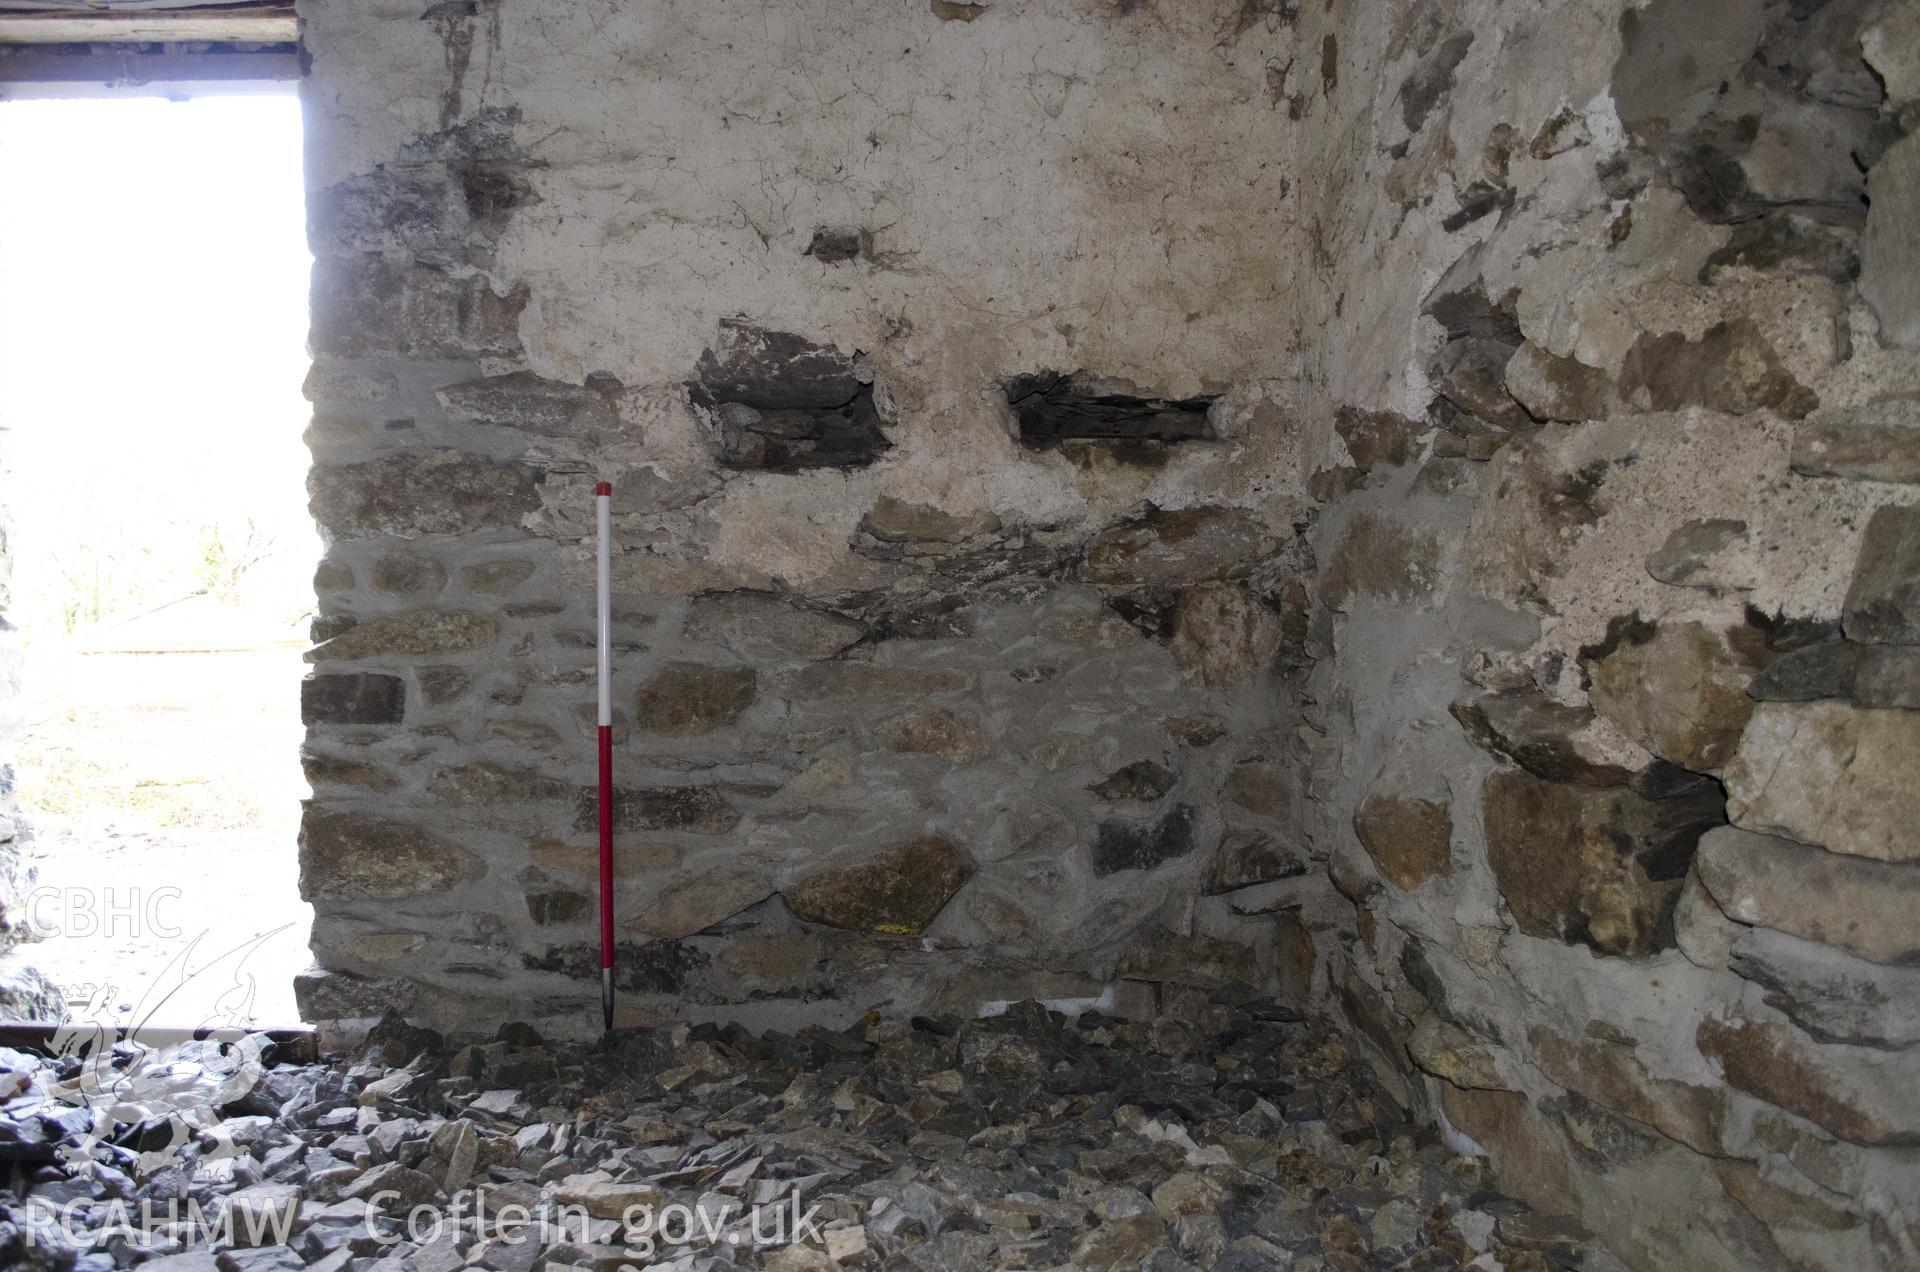 View from south-east showing NW wall of the NE room (NE side), taken by Jessica Davidson, Gwynedd Archaeological Trust, 8th Jan 2016.